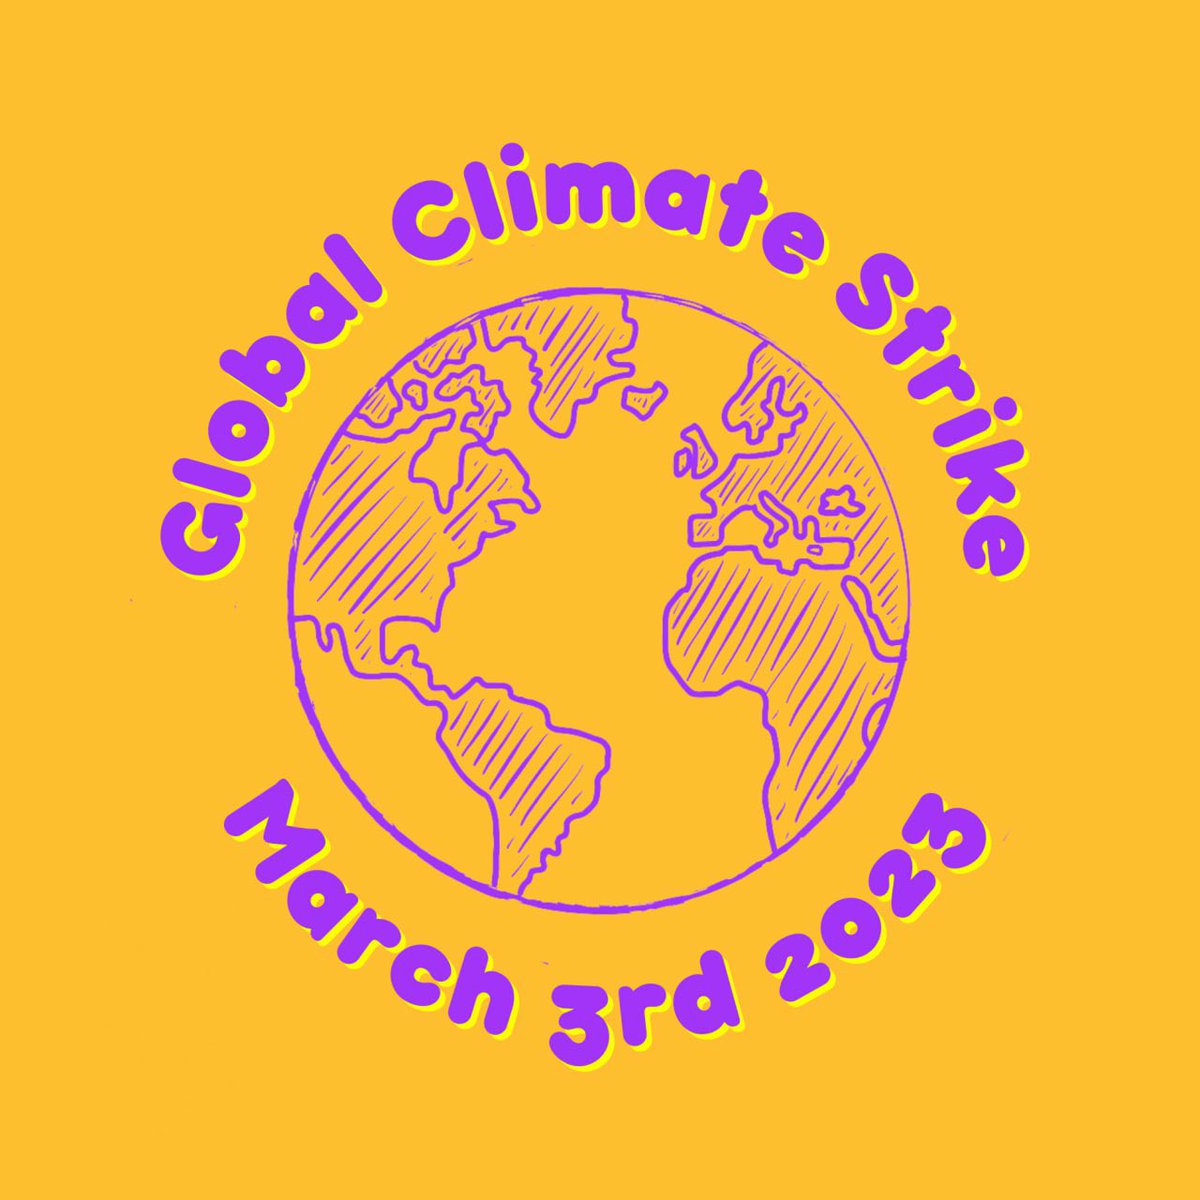 Climate Strike March 3 - In preparation, let's ZOOM on Thursday, February 23, 9am EST! us02web.zoom.us/j/82576893031 - mailchi.mp/5490b97574c4/c…